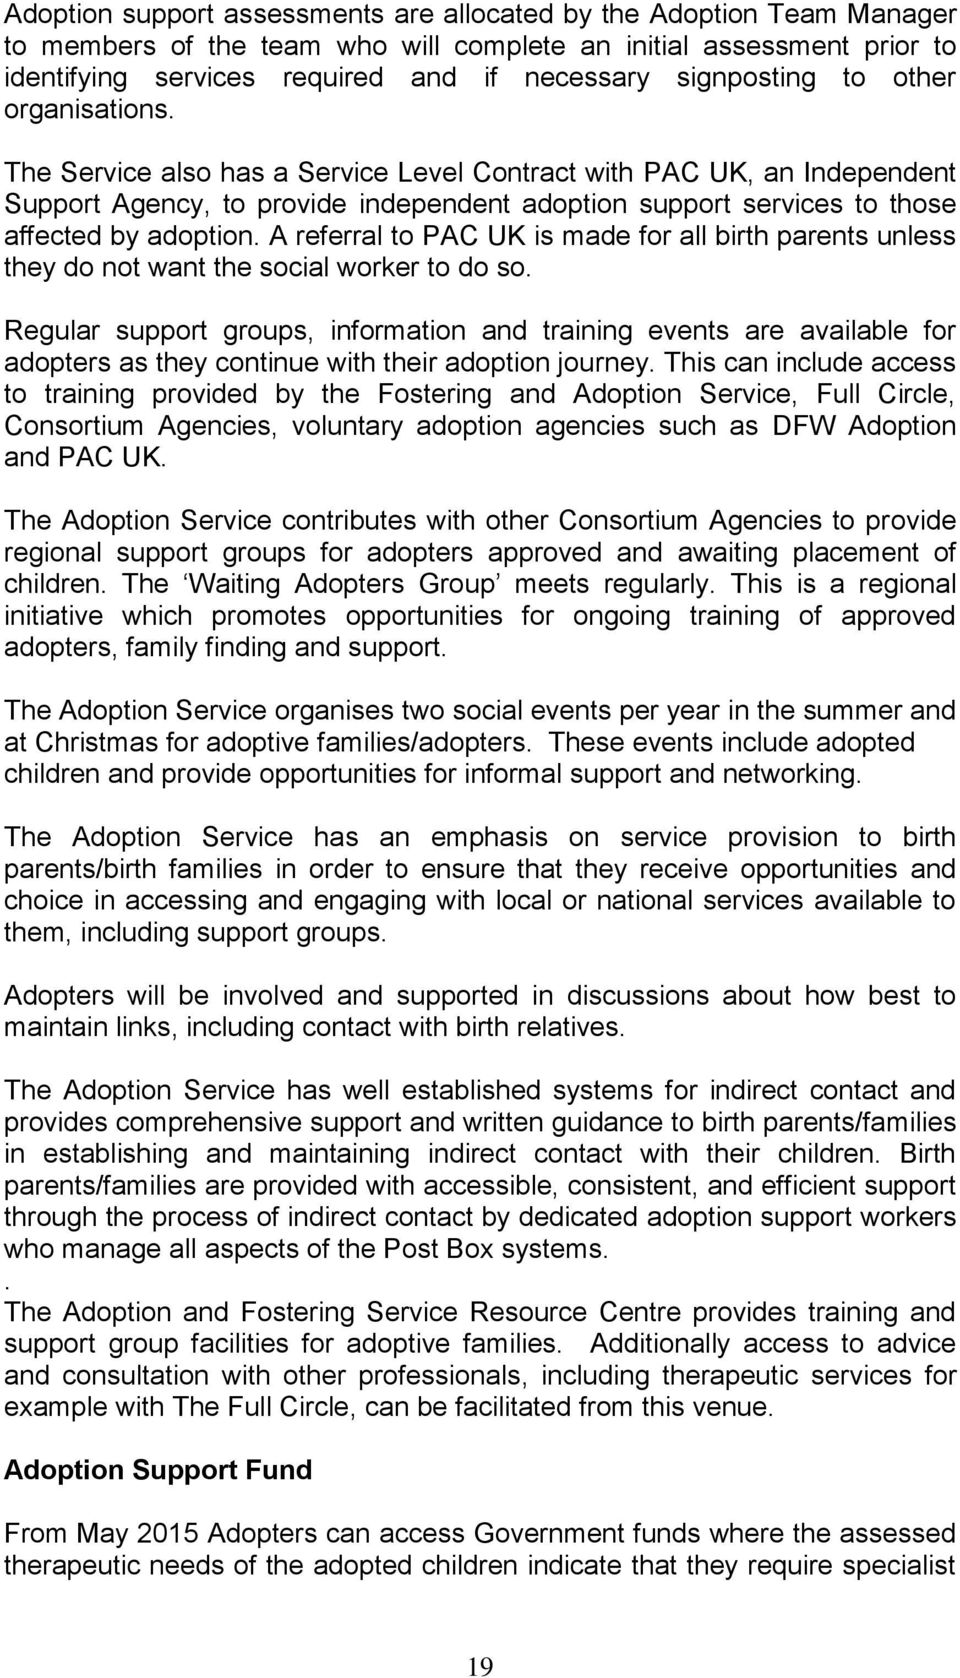 The Service also has a Service Level Contract with PAC UK, an Independent Support Agency, to provide independent adoption support services to those affected by adoption.